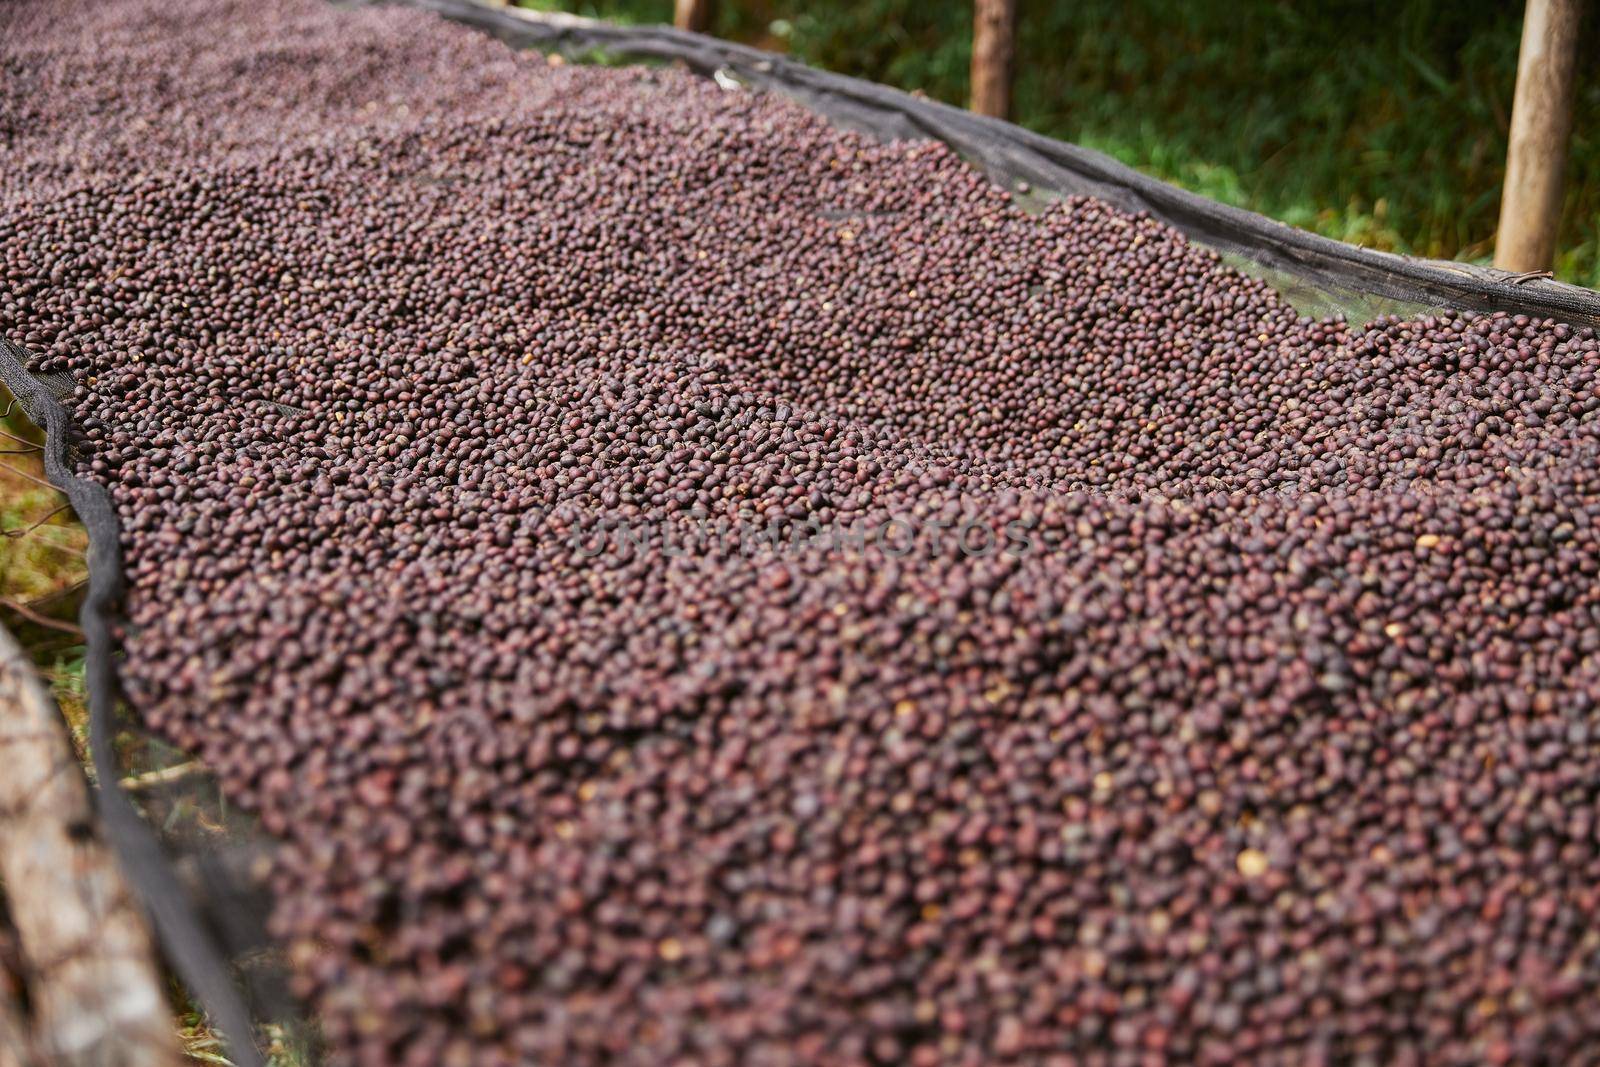 coffee natural drying process at washing station at the mountain region of eastern africa